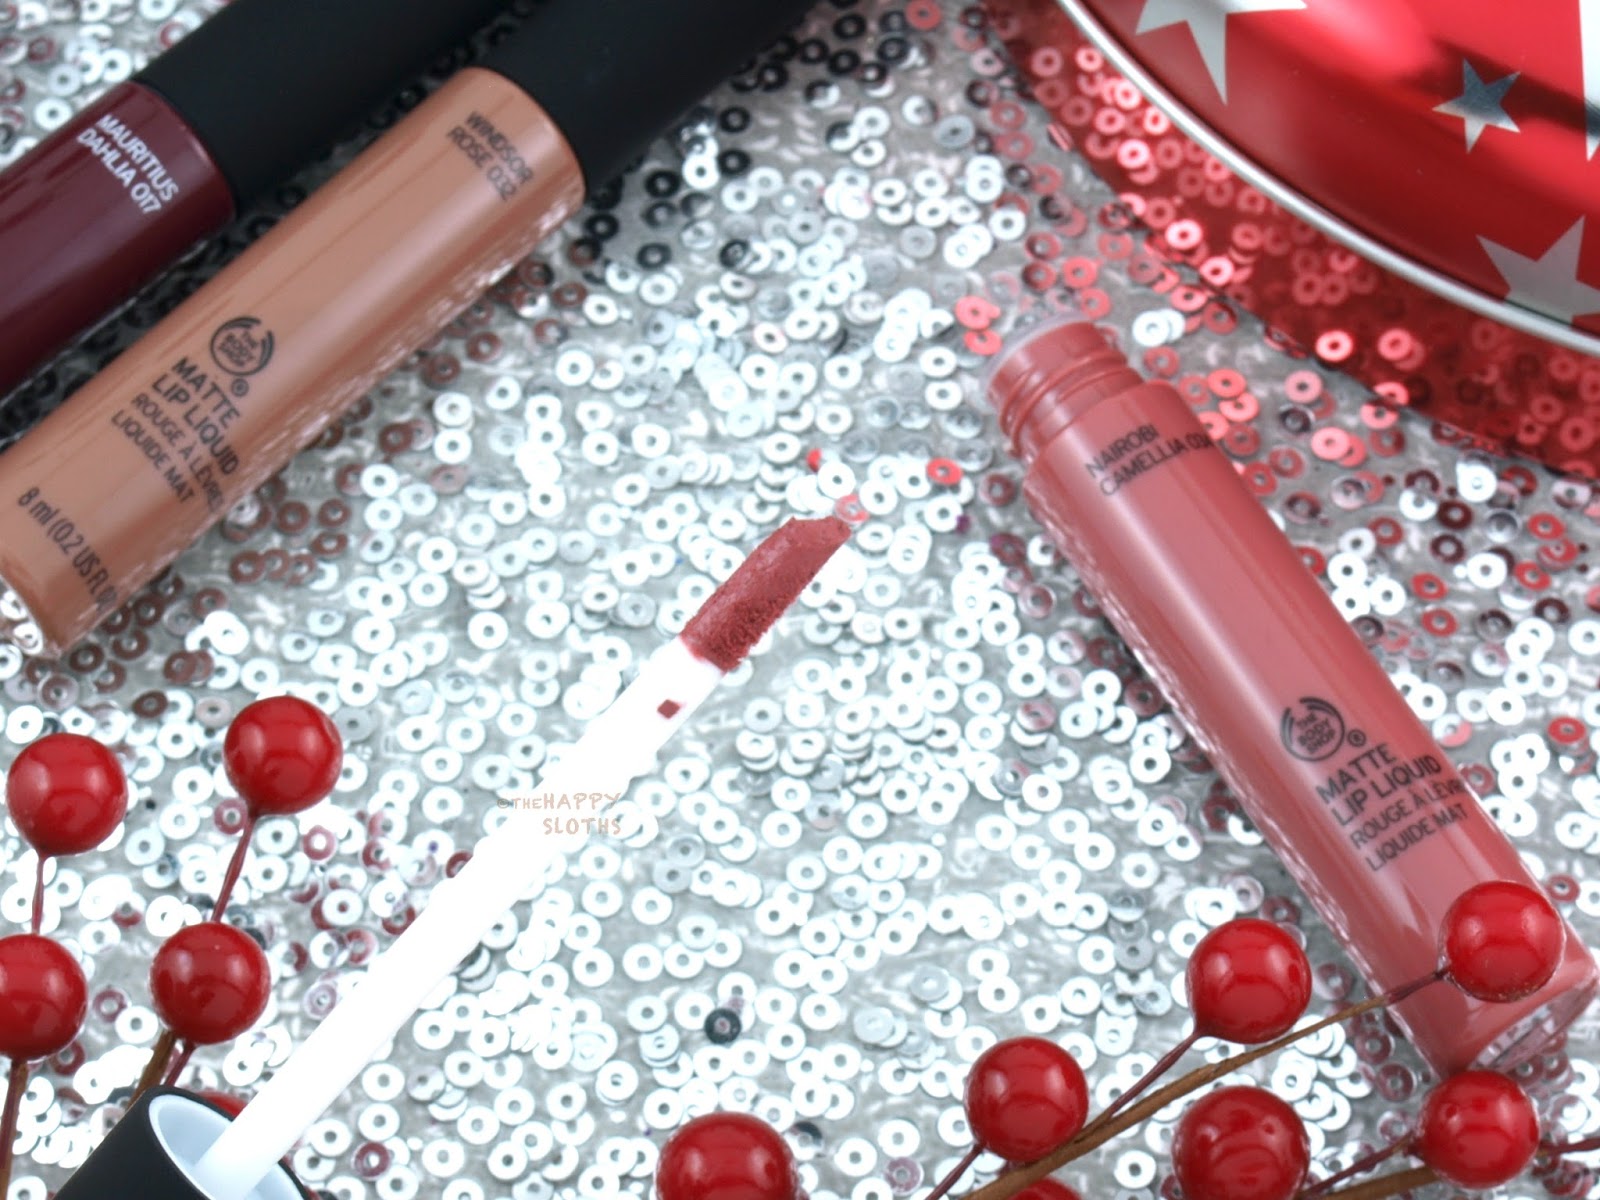 The Body Shop x House of Holland Limited Edition Matte Lip Liquid Collection: Review and Swatches